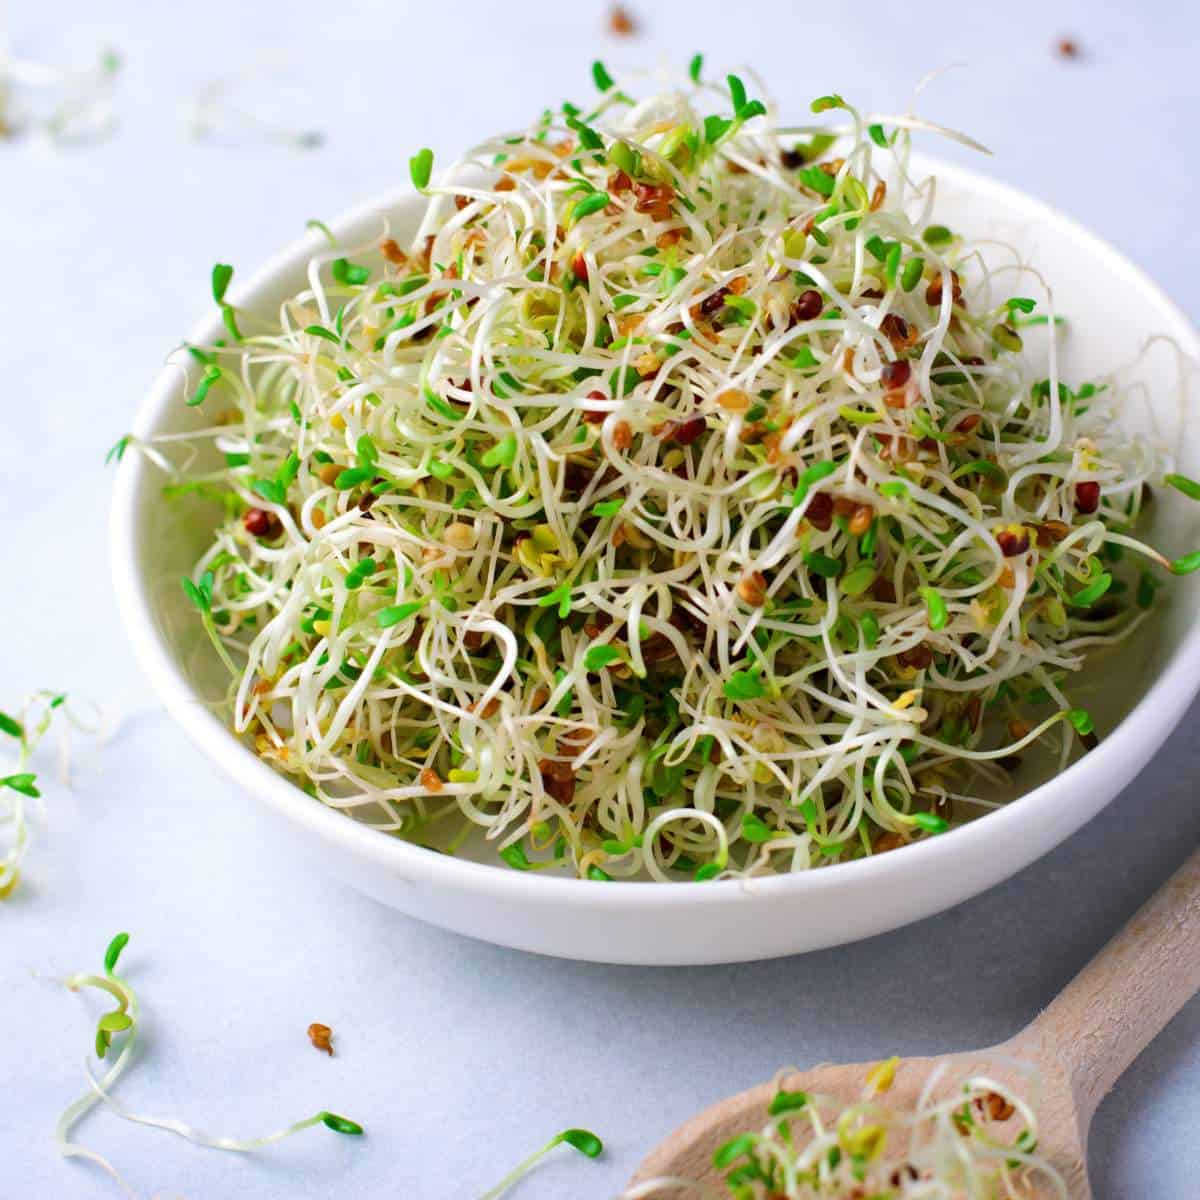 Learn how to eat sprouts with a wooden spoon.